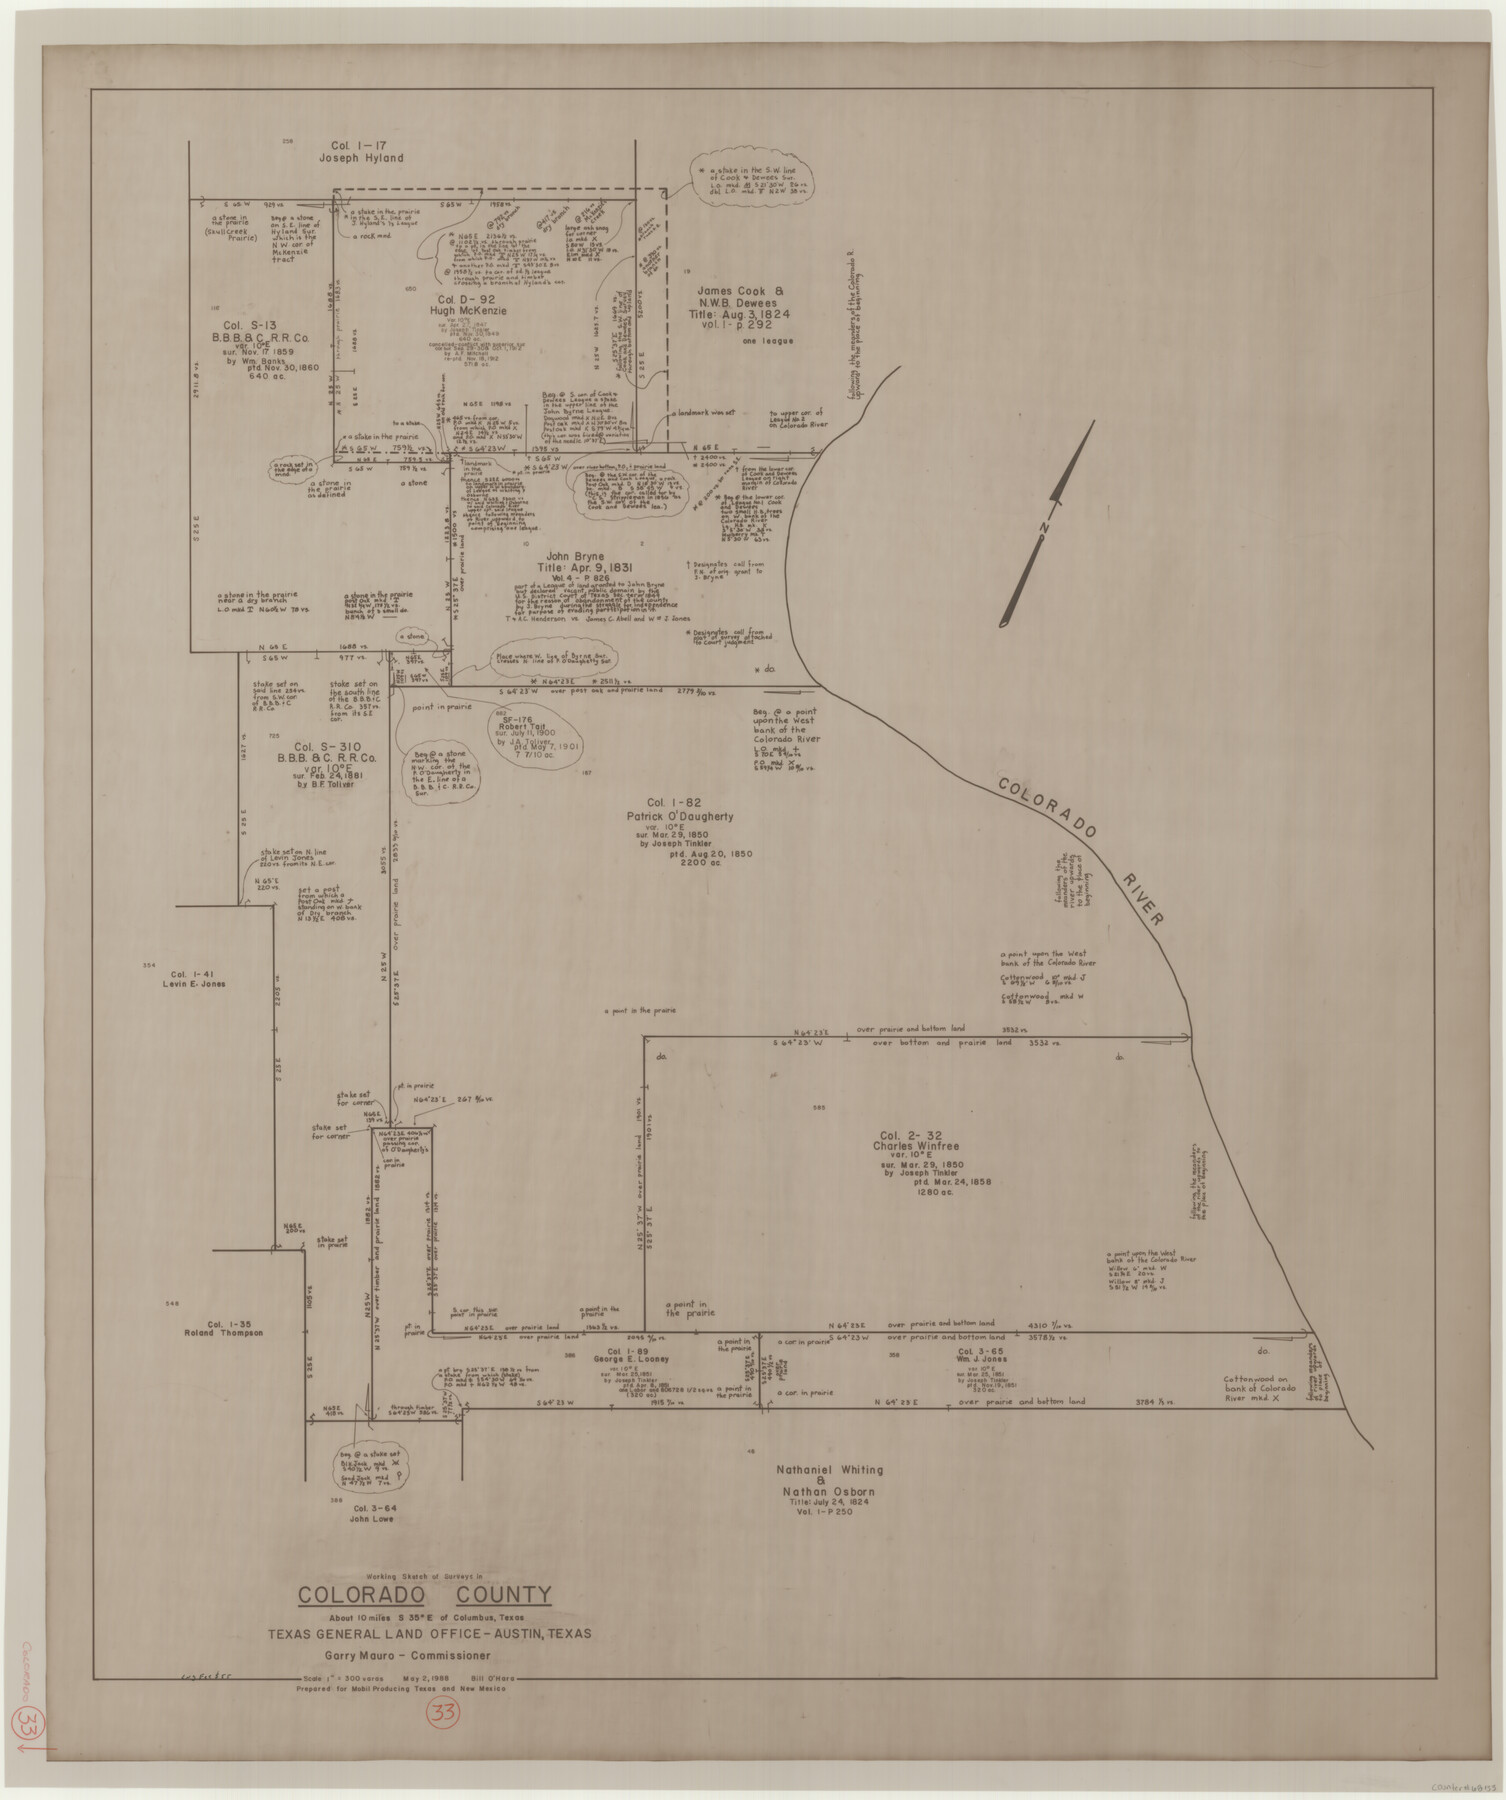 68133, Colorado County Working Sketch 33, General Map Collection